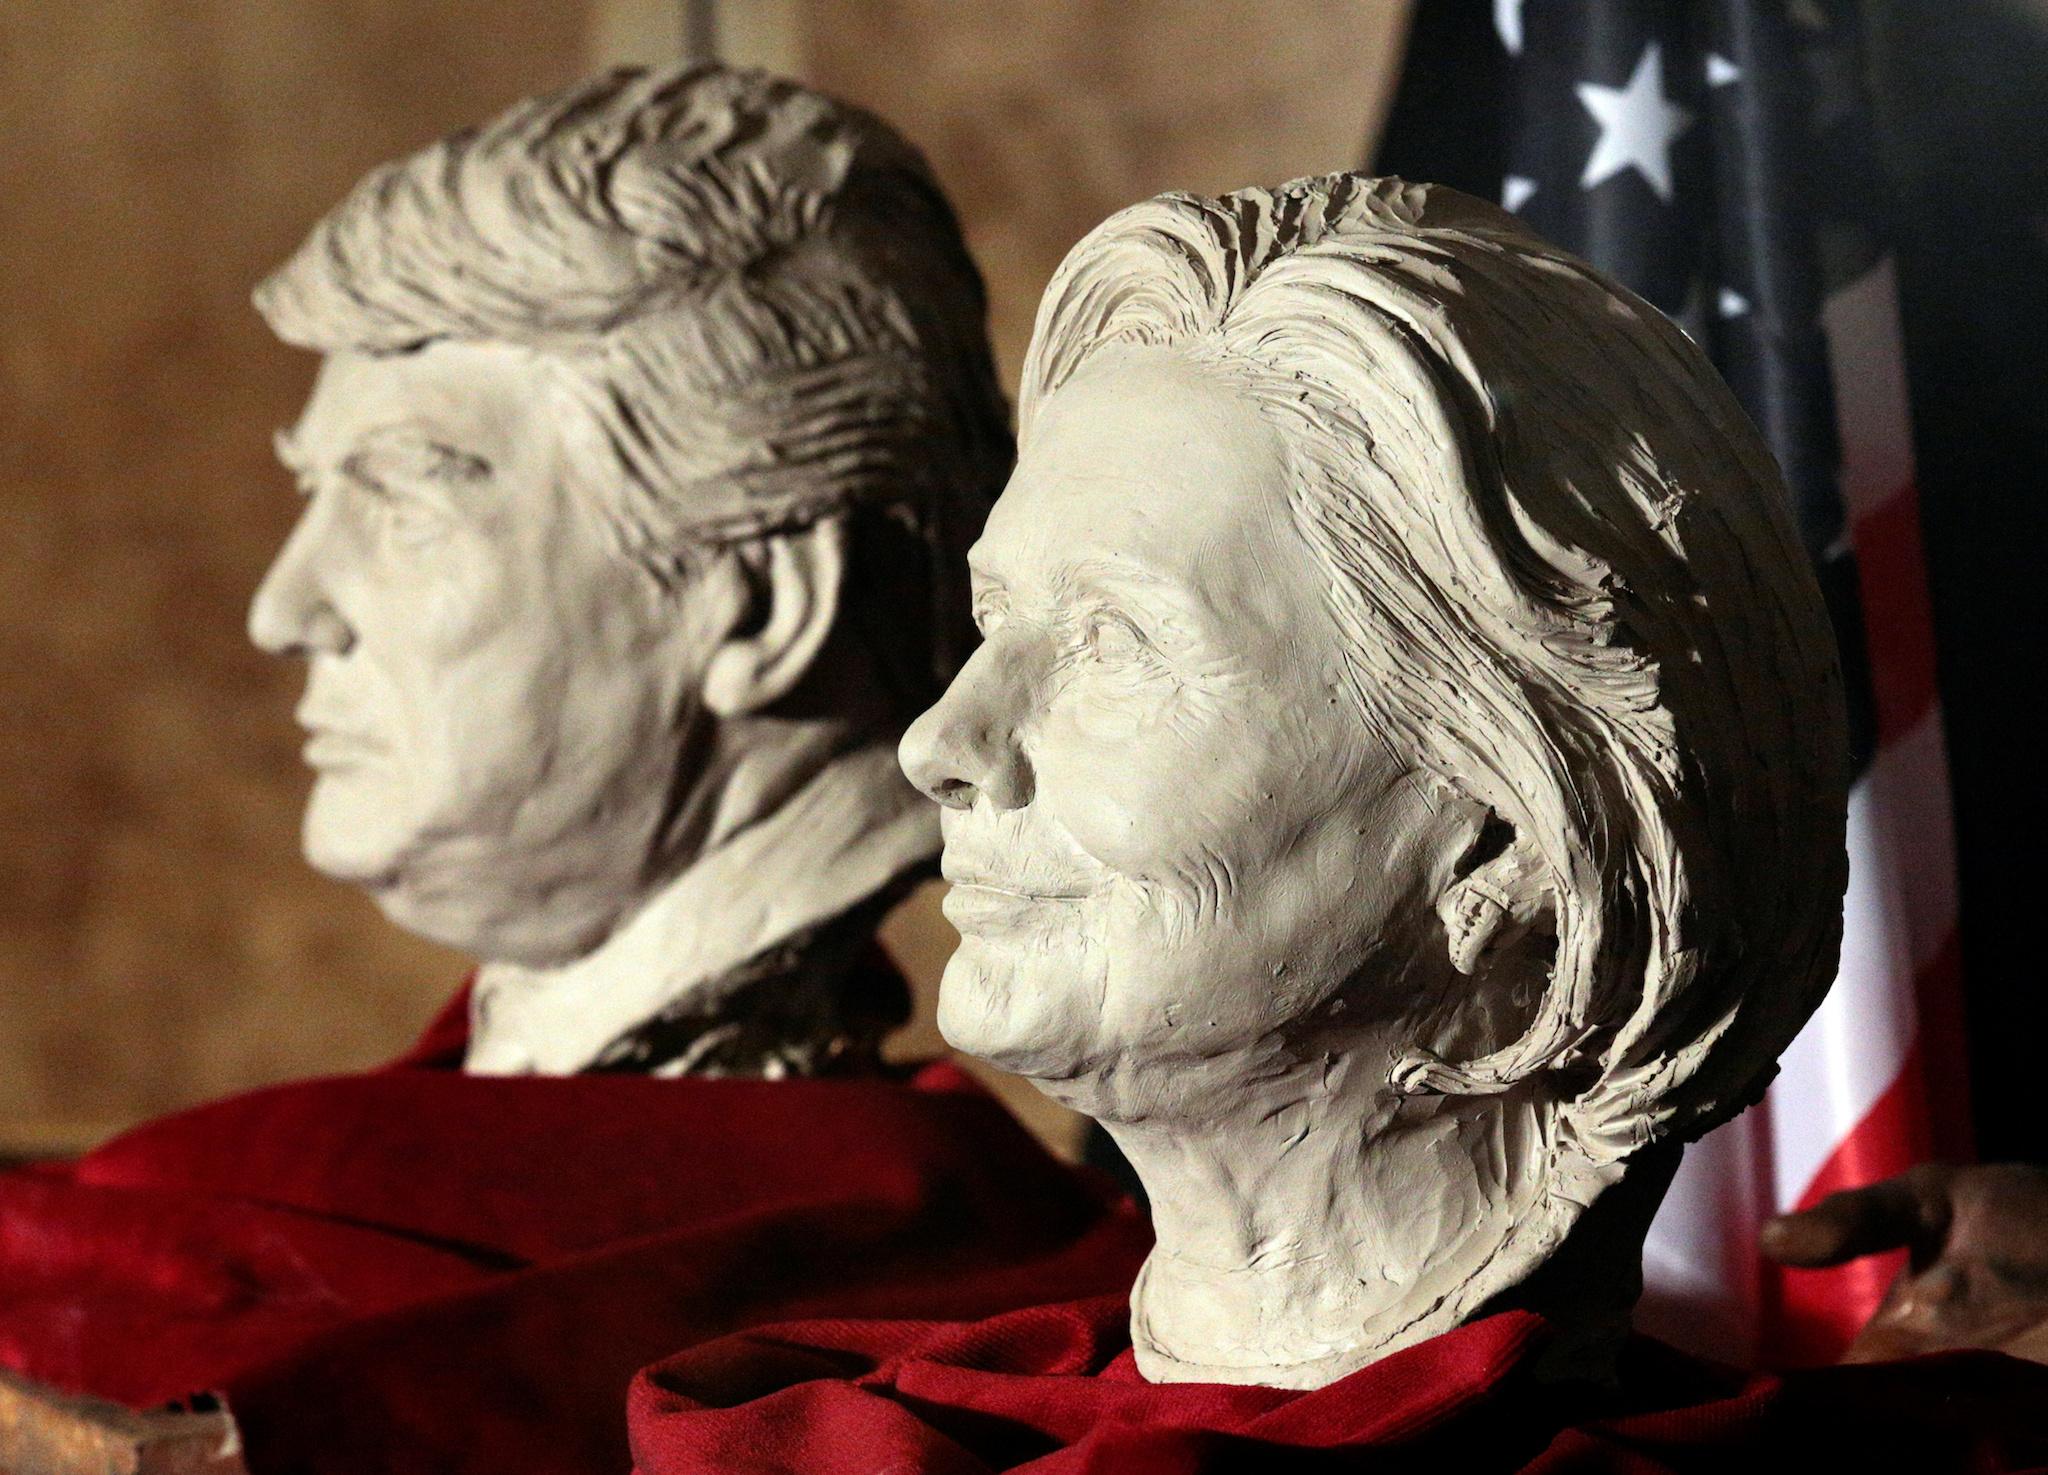 Clay busts of U.S. presidential candidates Hillary Clinton and Donald Trump are seen at the Wax Museum in Madrid, Spain, November 4, 2016